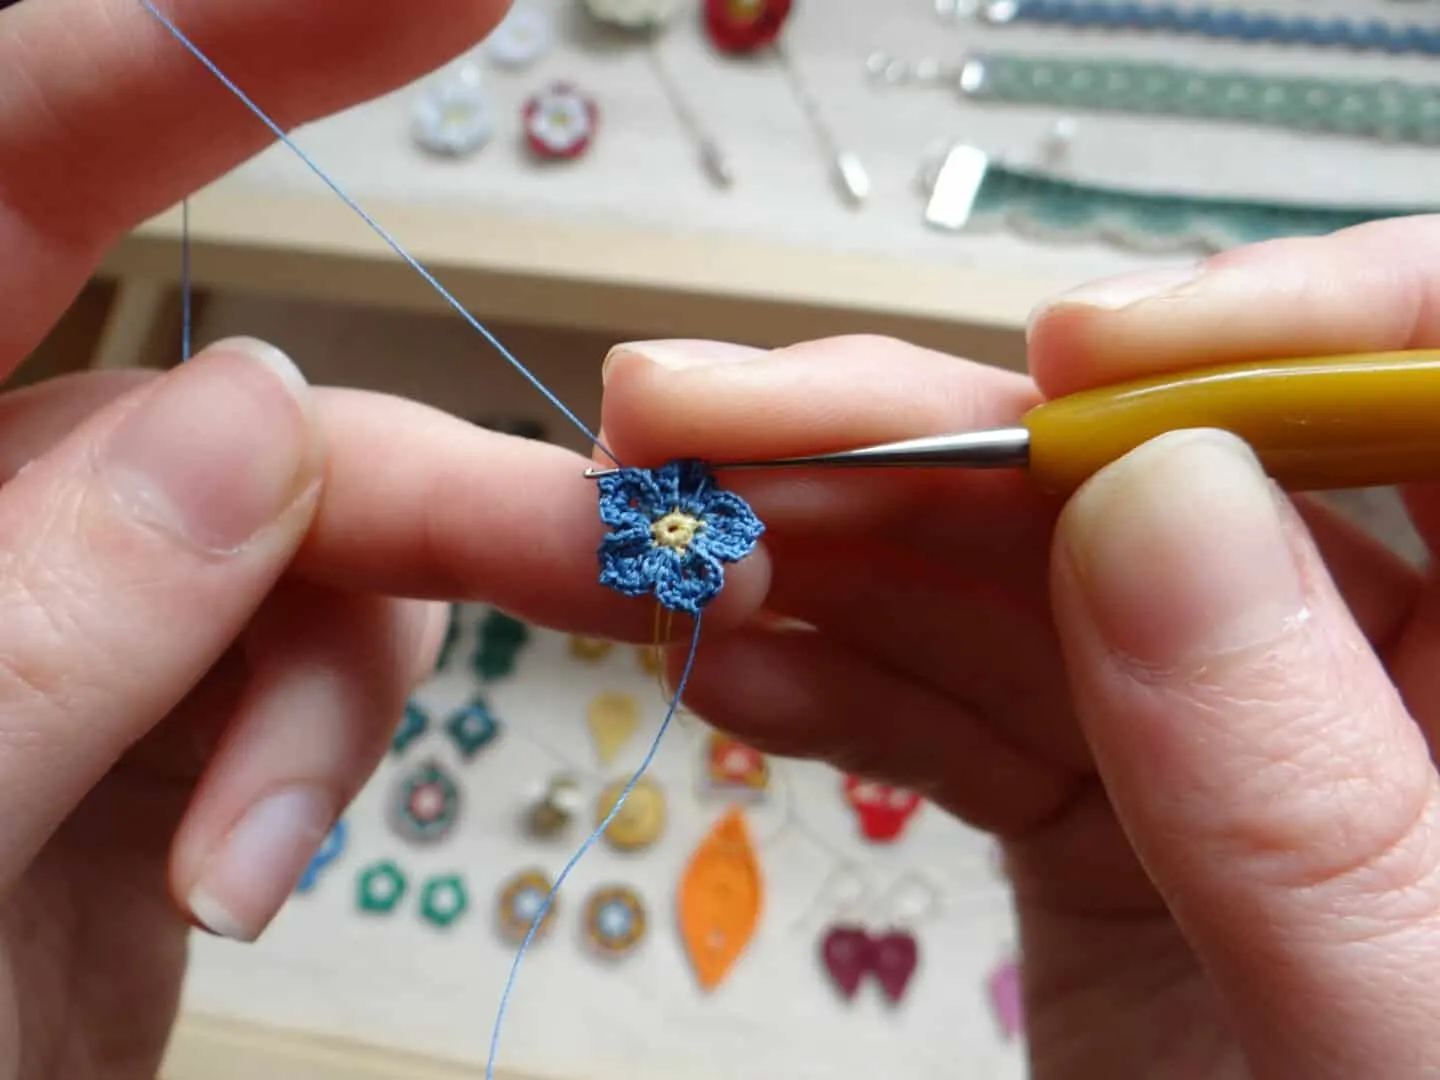 tiny micro crochet forget me not flower being crocheted with hook in hands